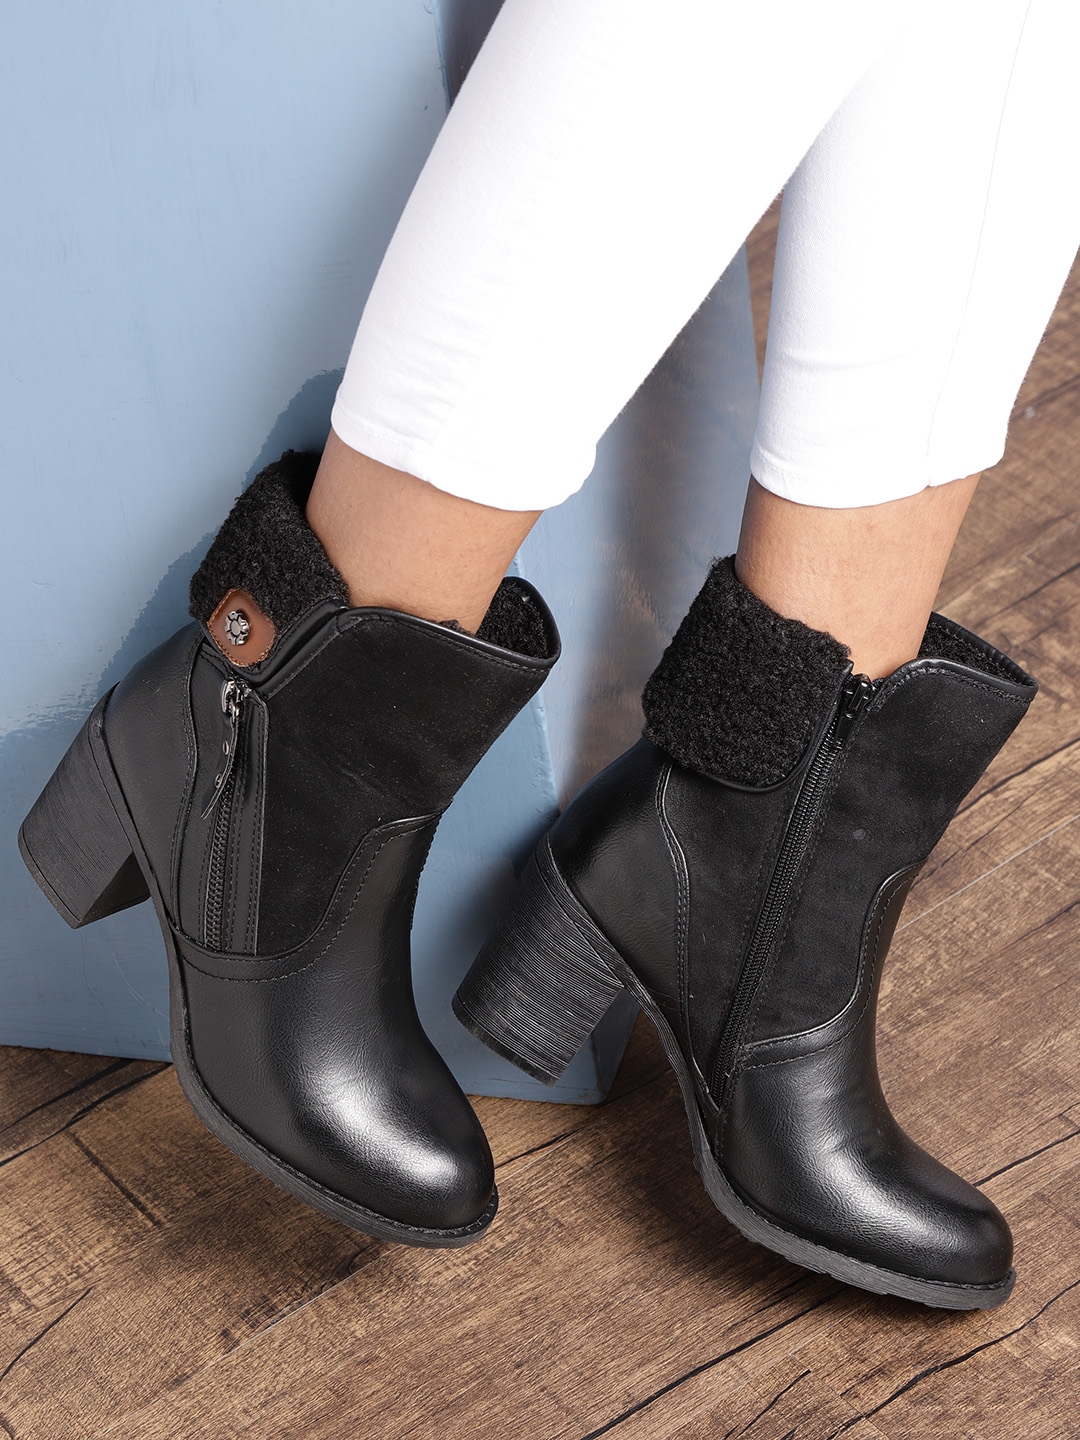 roadster boots for women